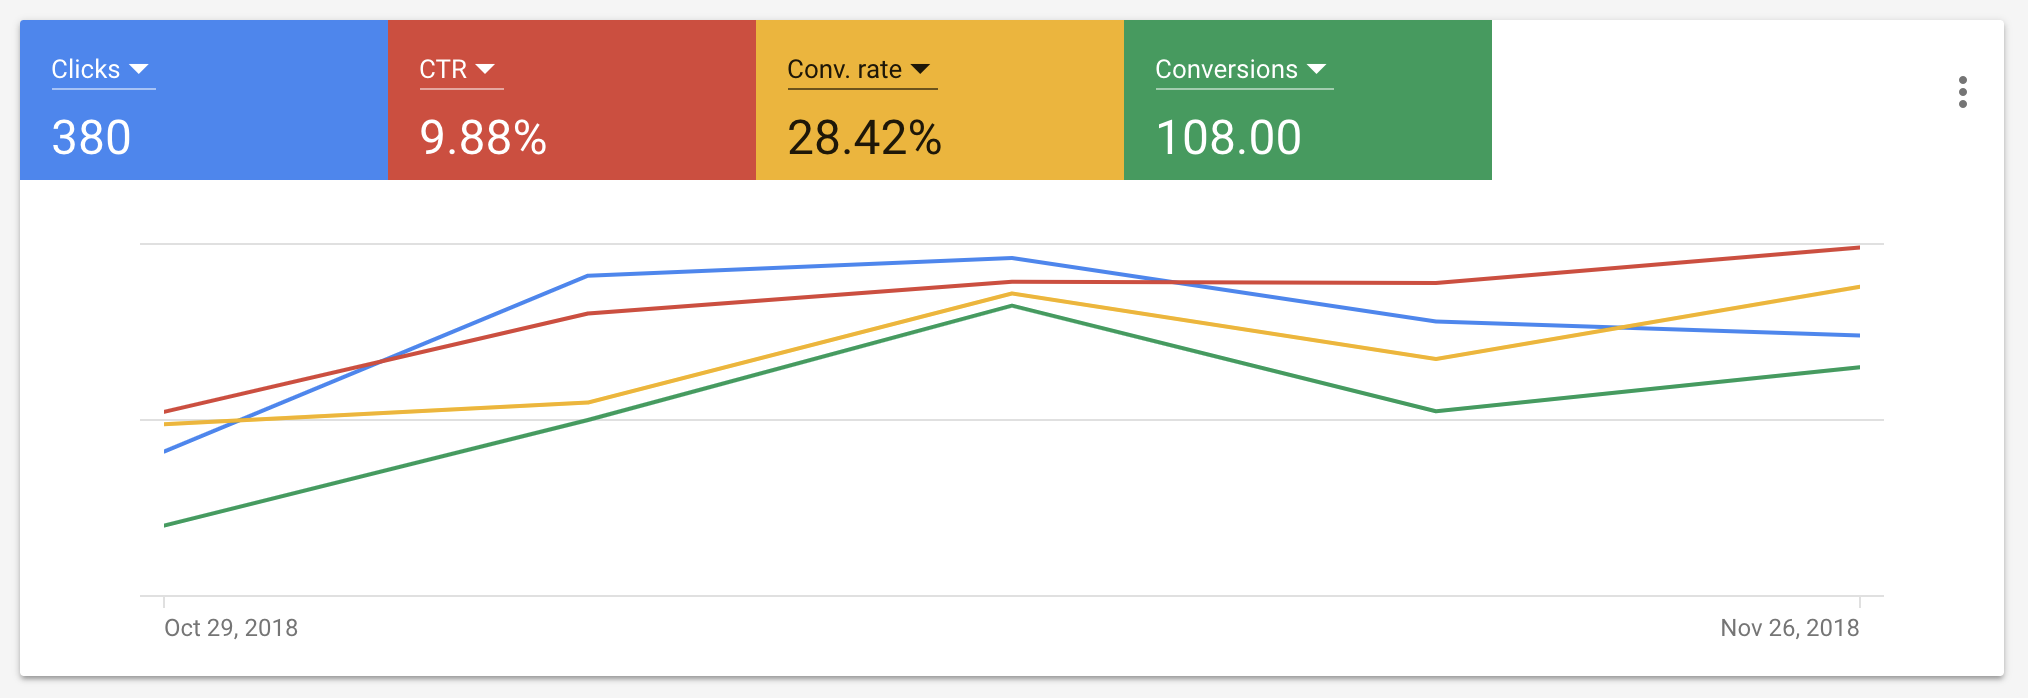 AdWords chart with clicks, CTR, Conv. Rate, and Conversions